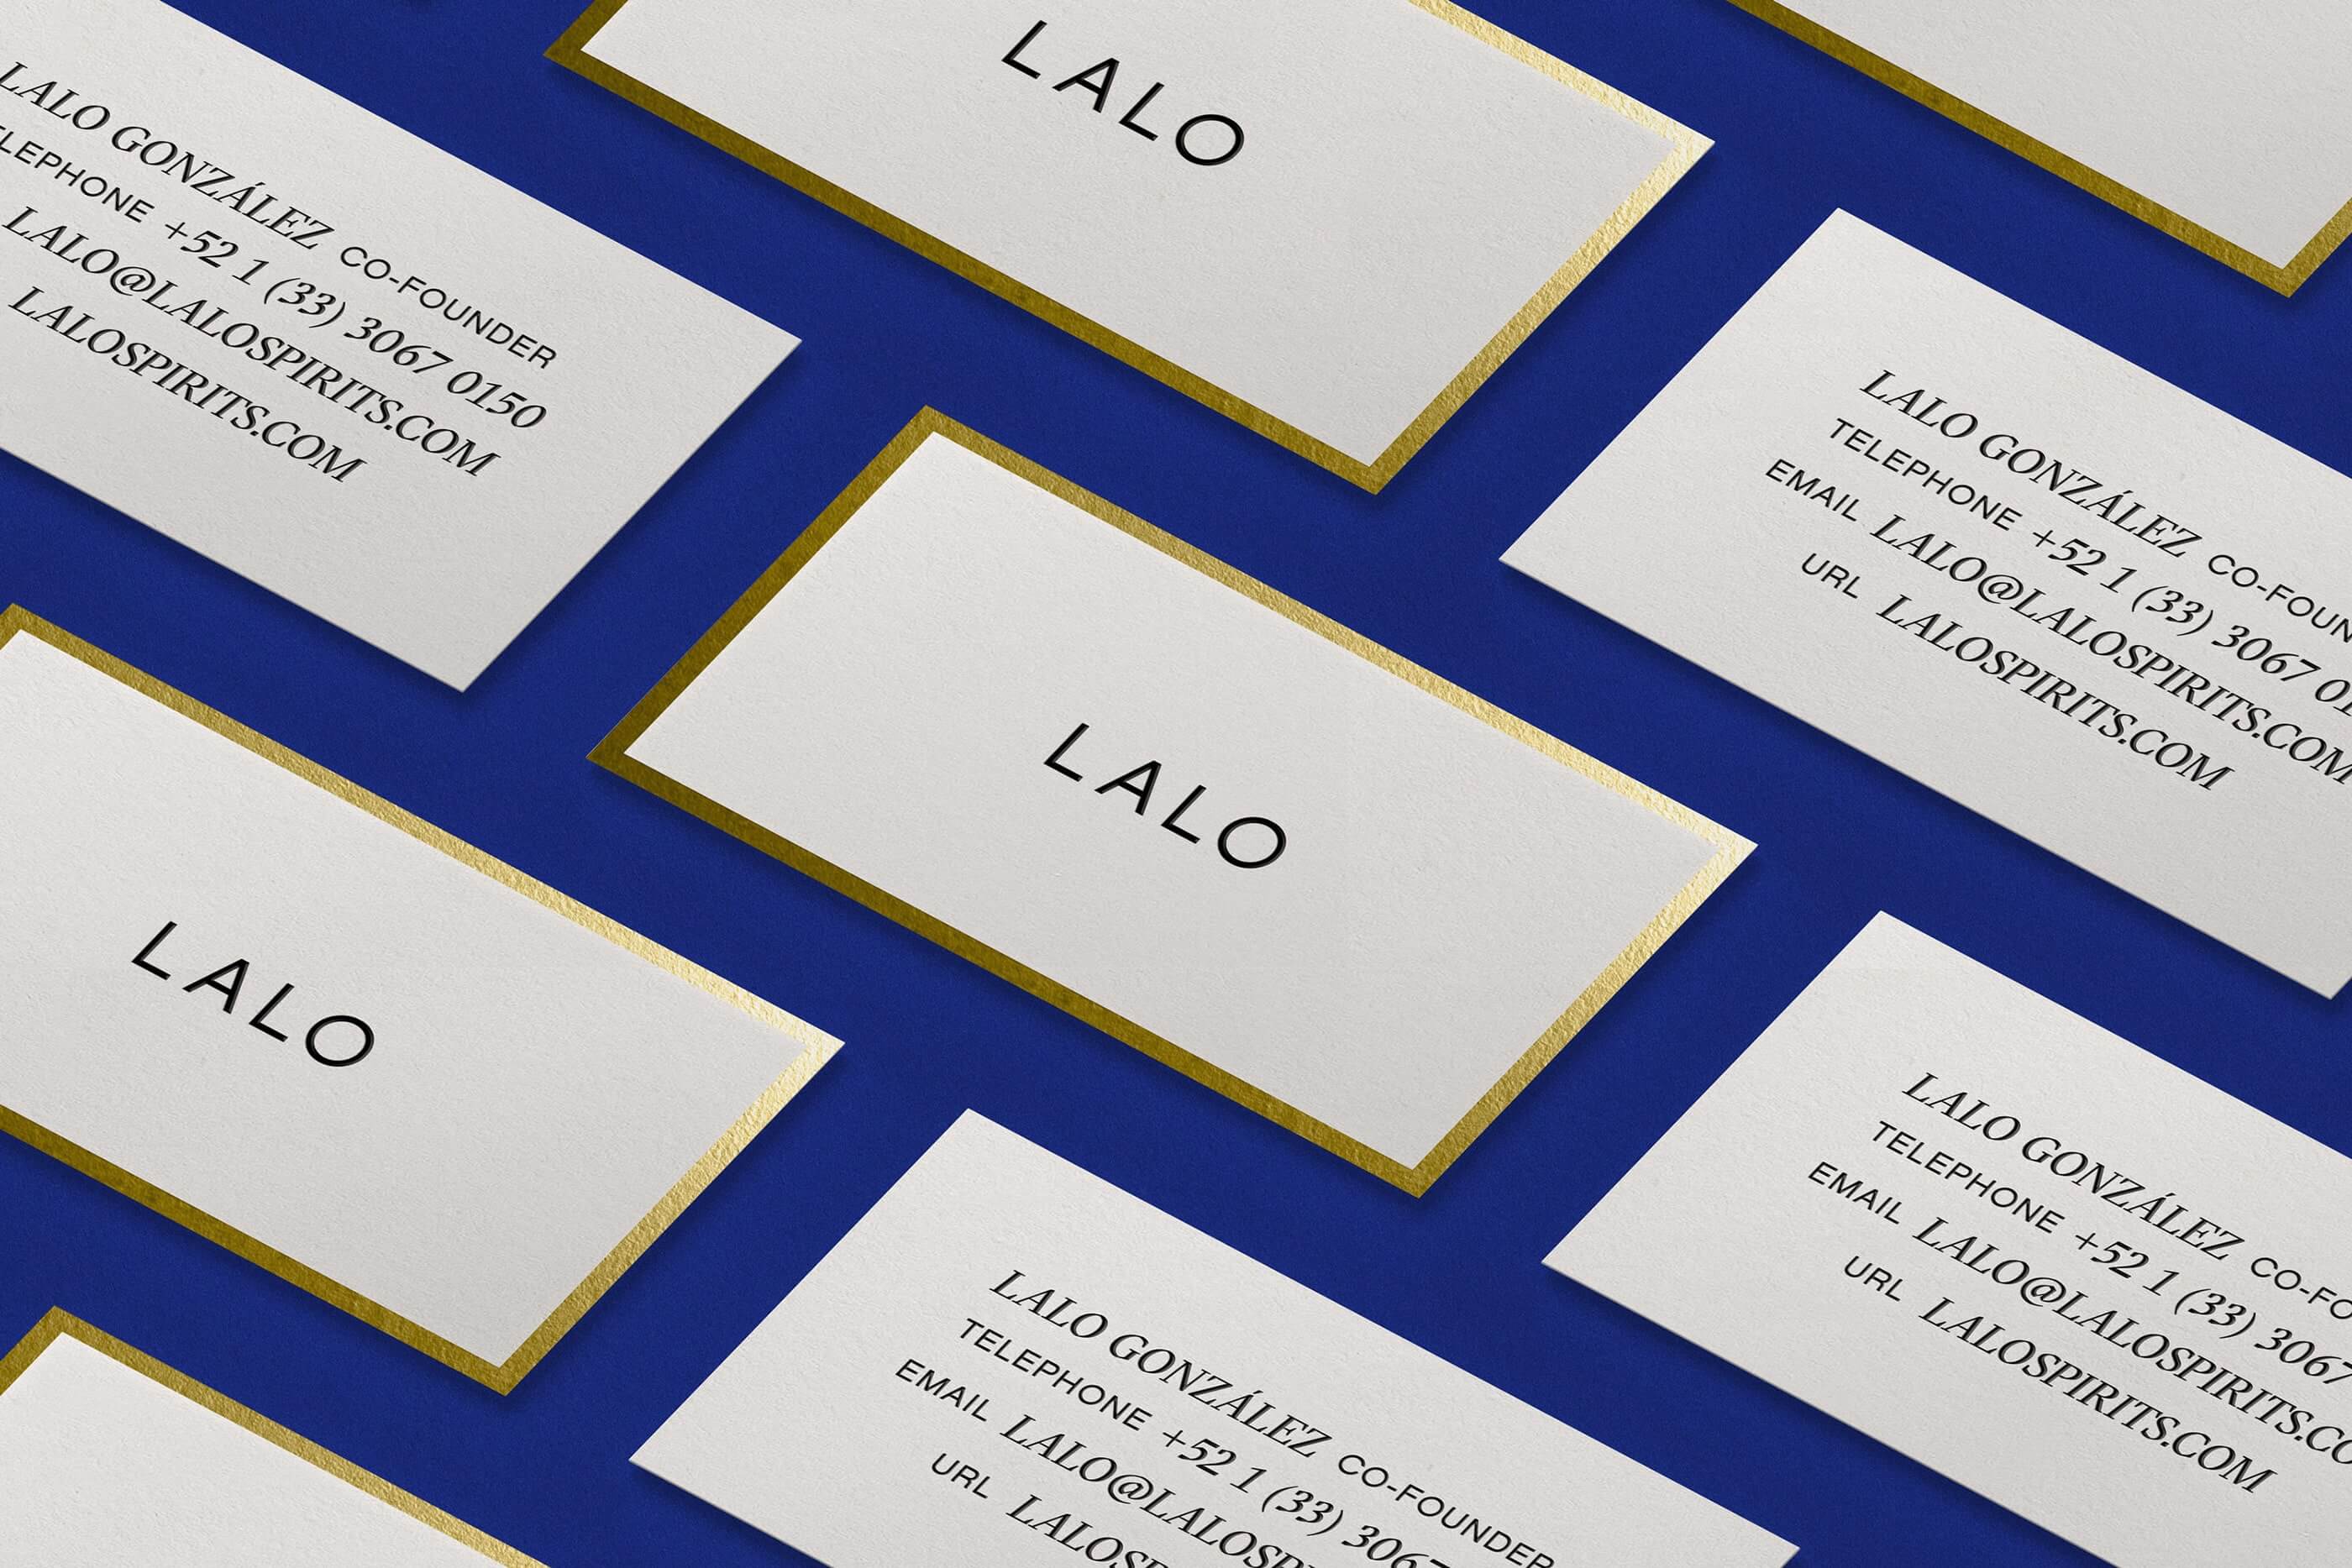 Lalo-Cards-01